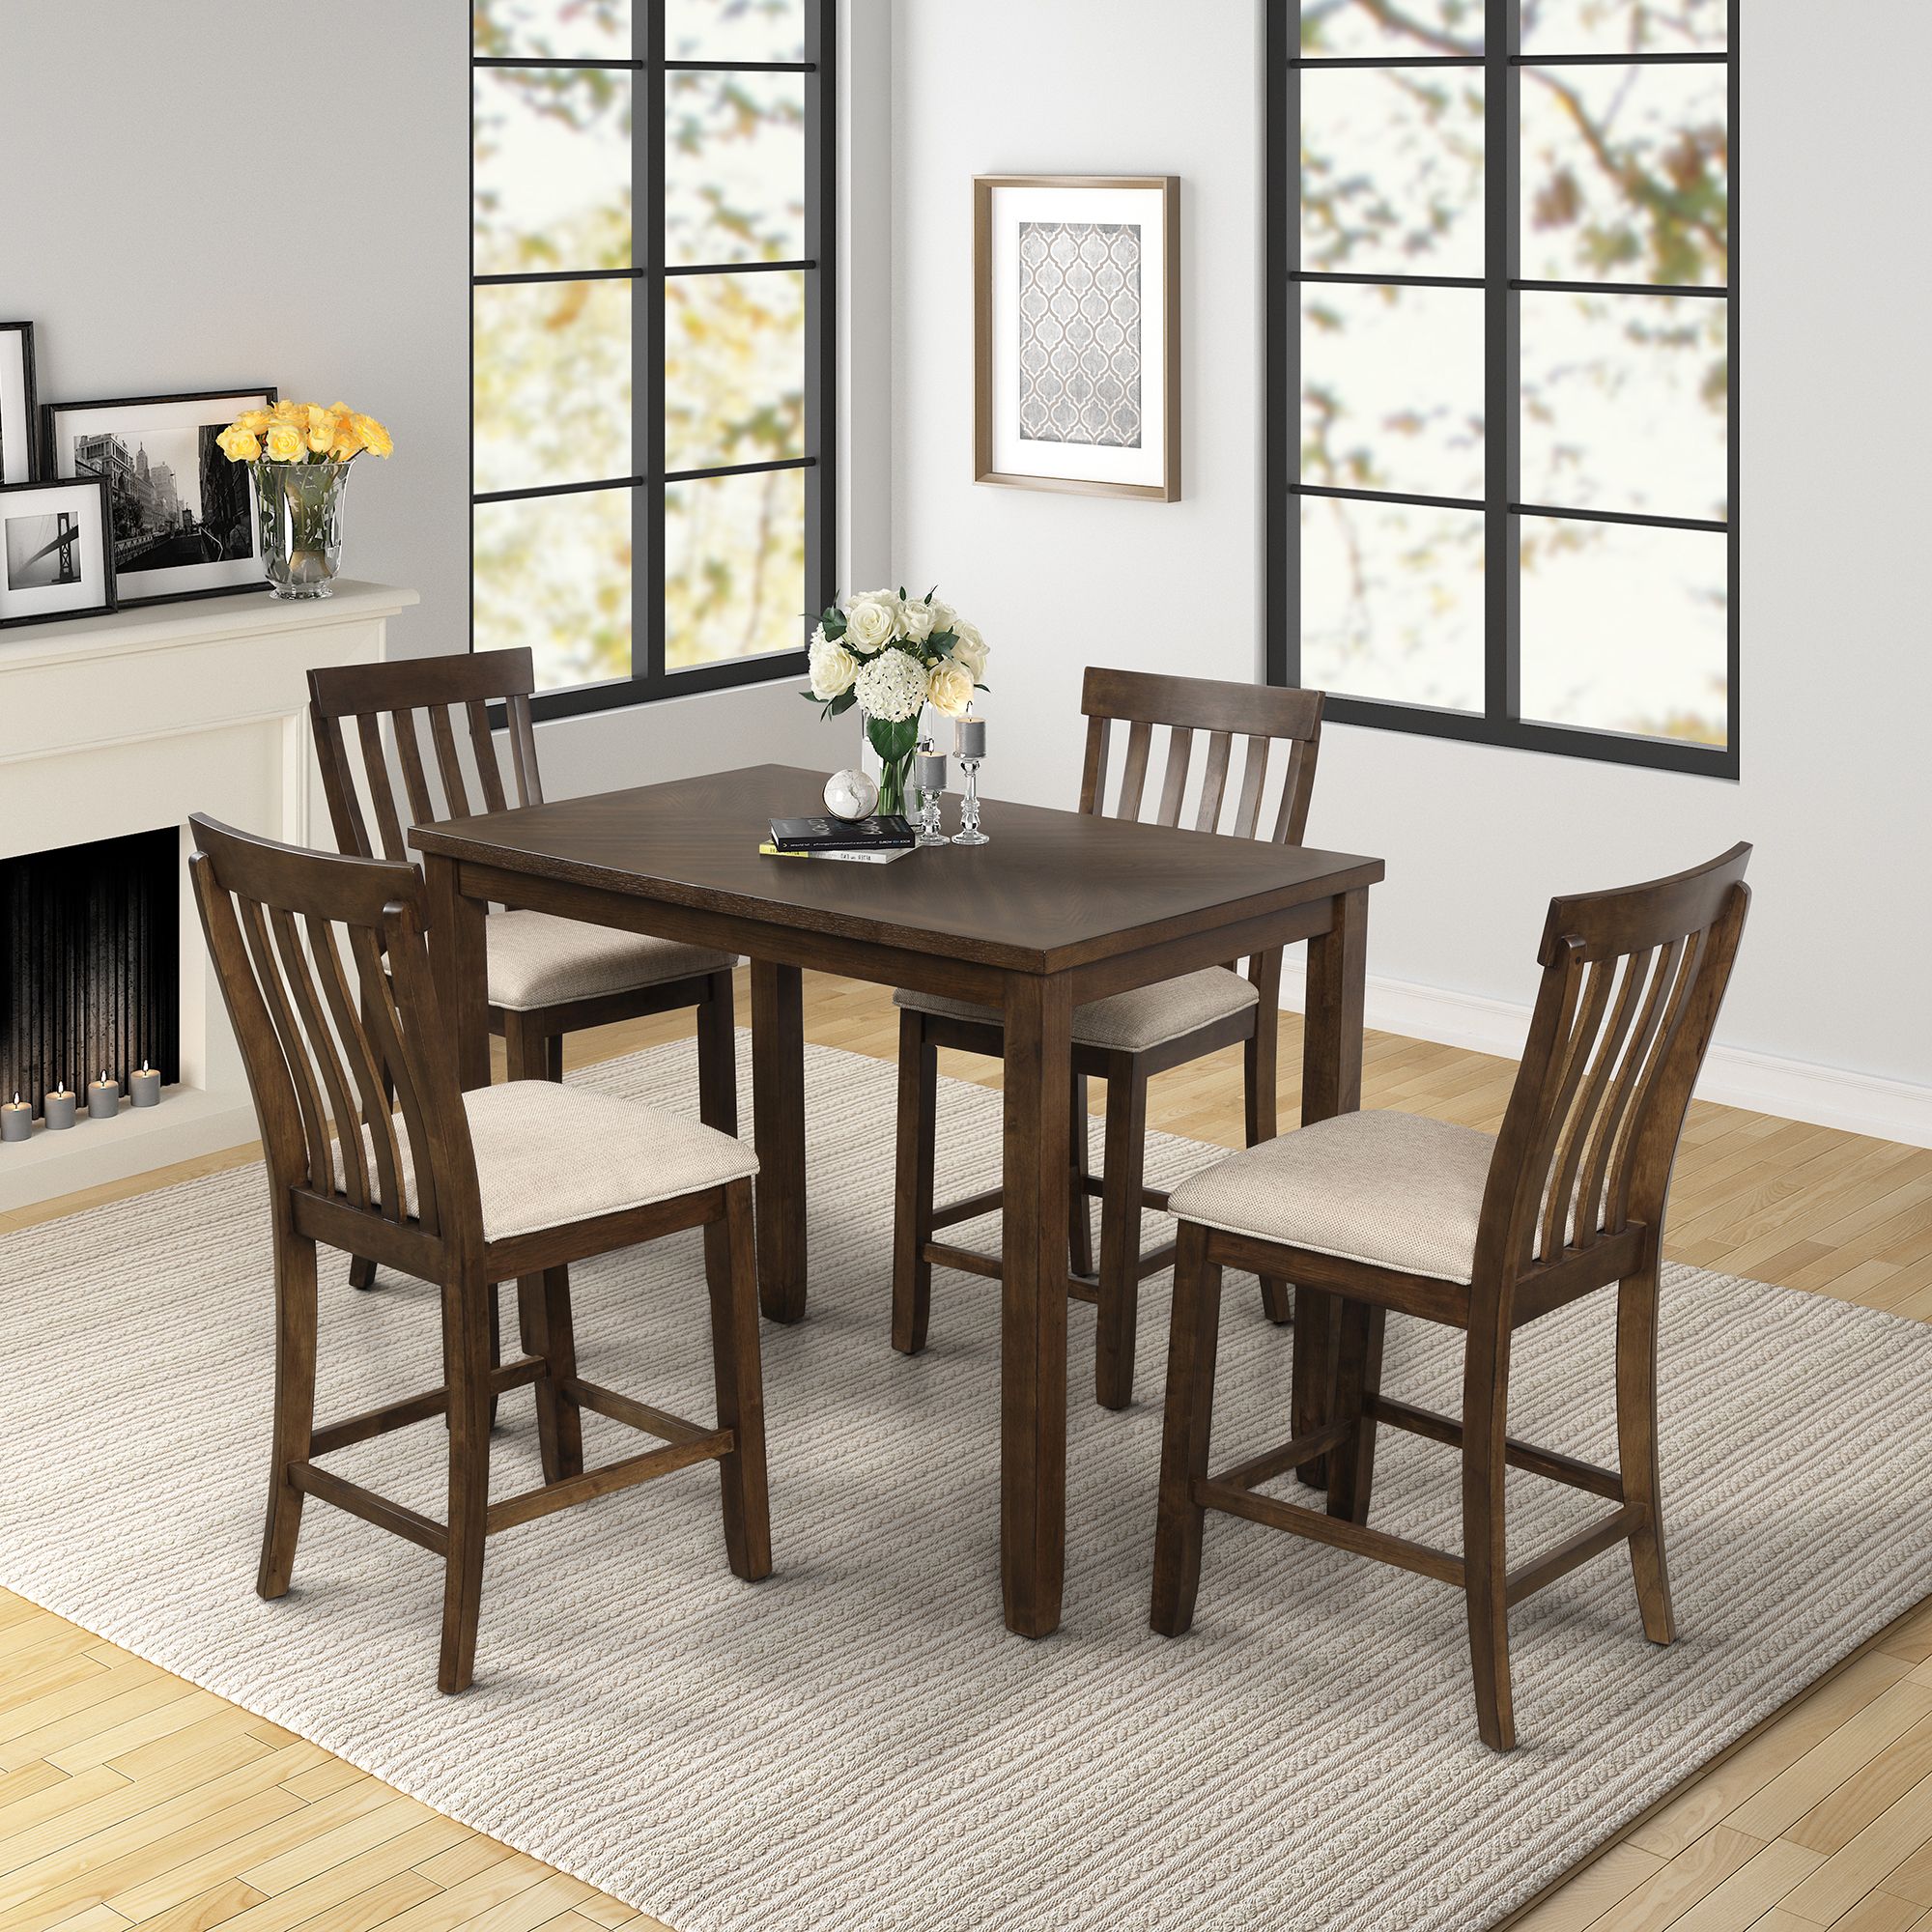 Neves 43'' Dining Tables Inside Favorite Dining Table Set With 4 Chairs, 5 Piece Wooden Kitchen (View 2 of 20)